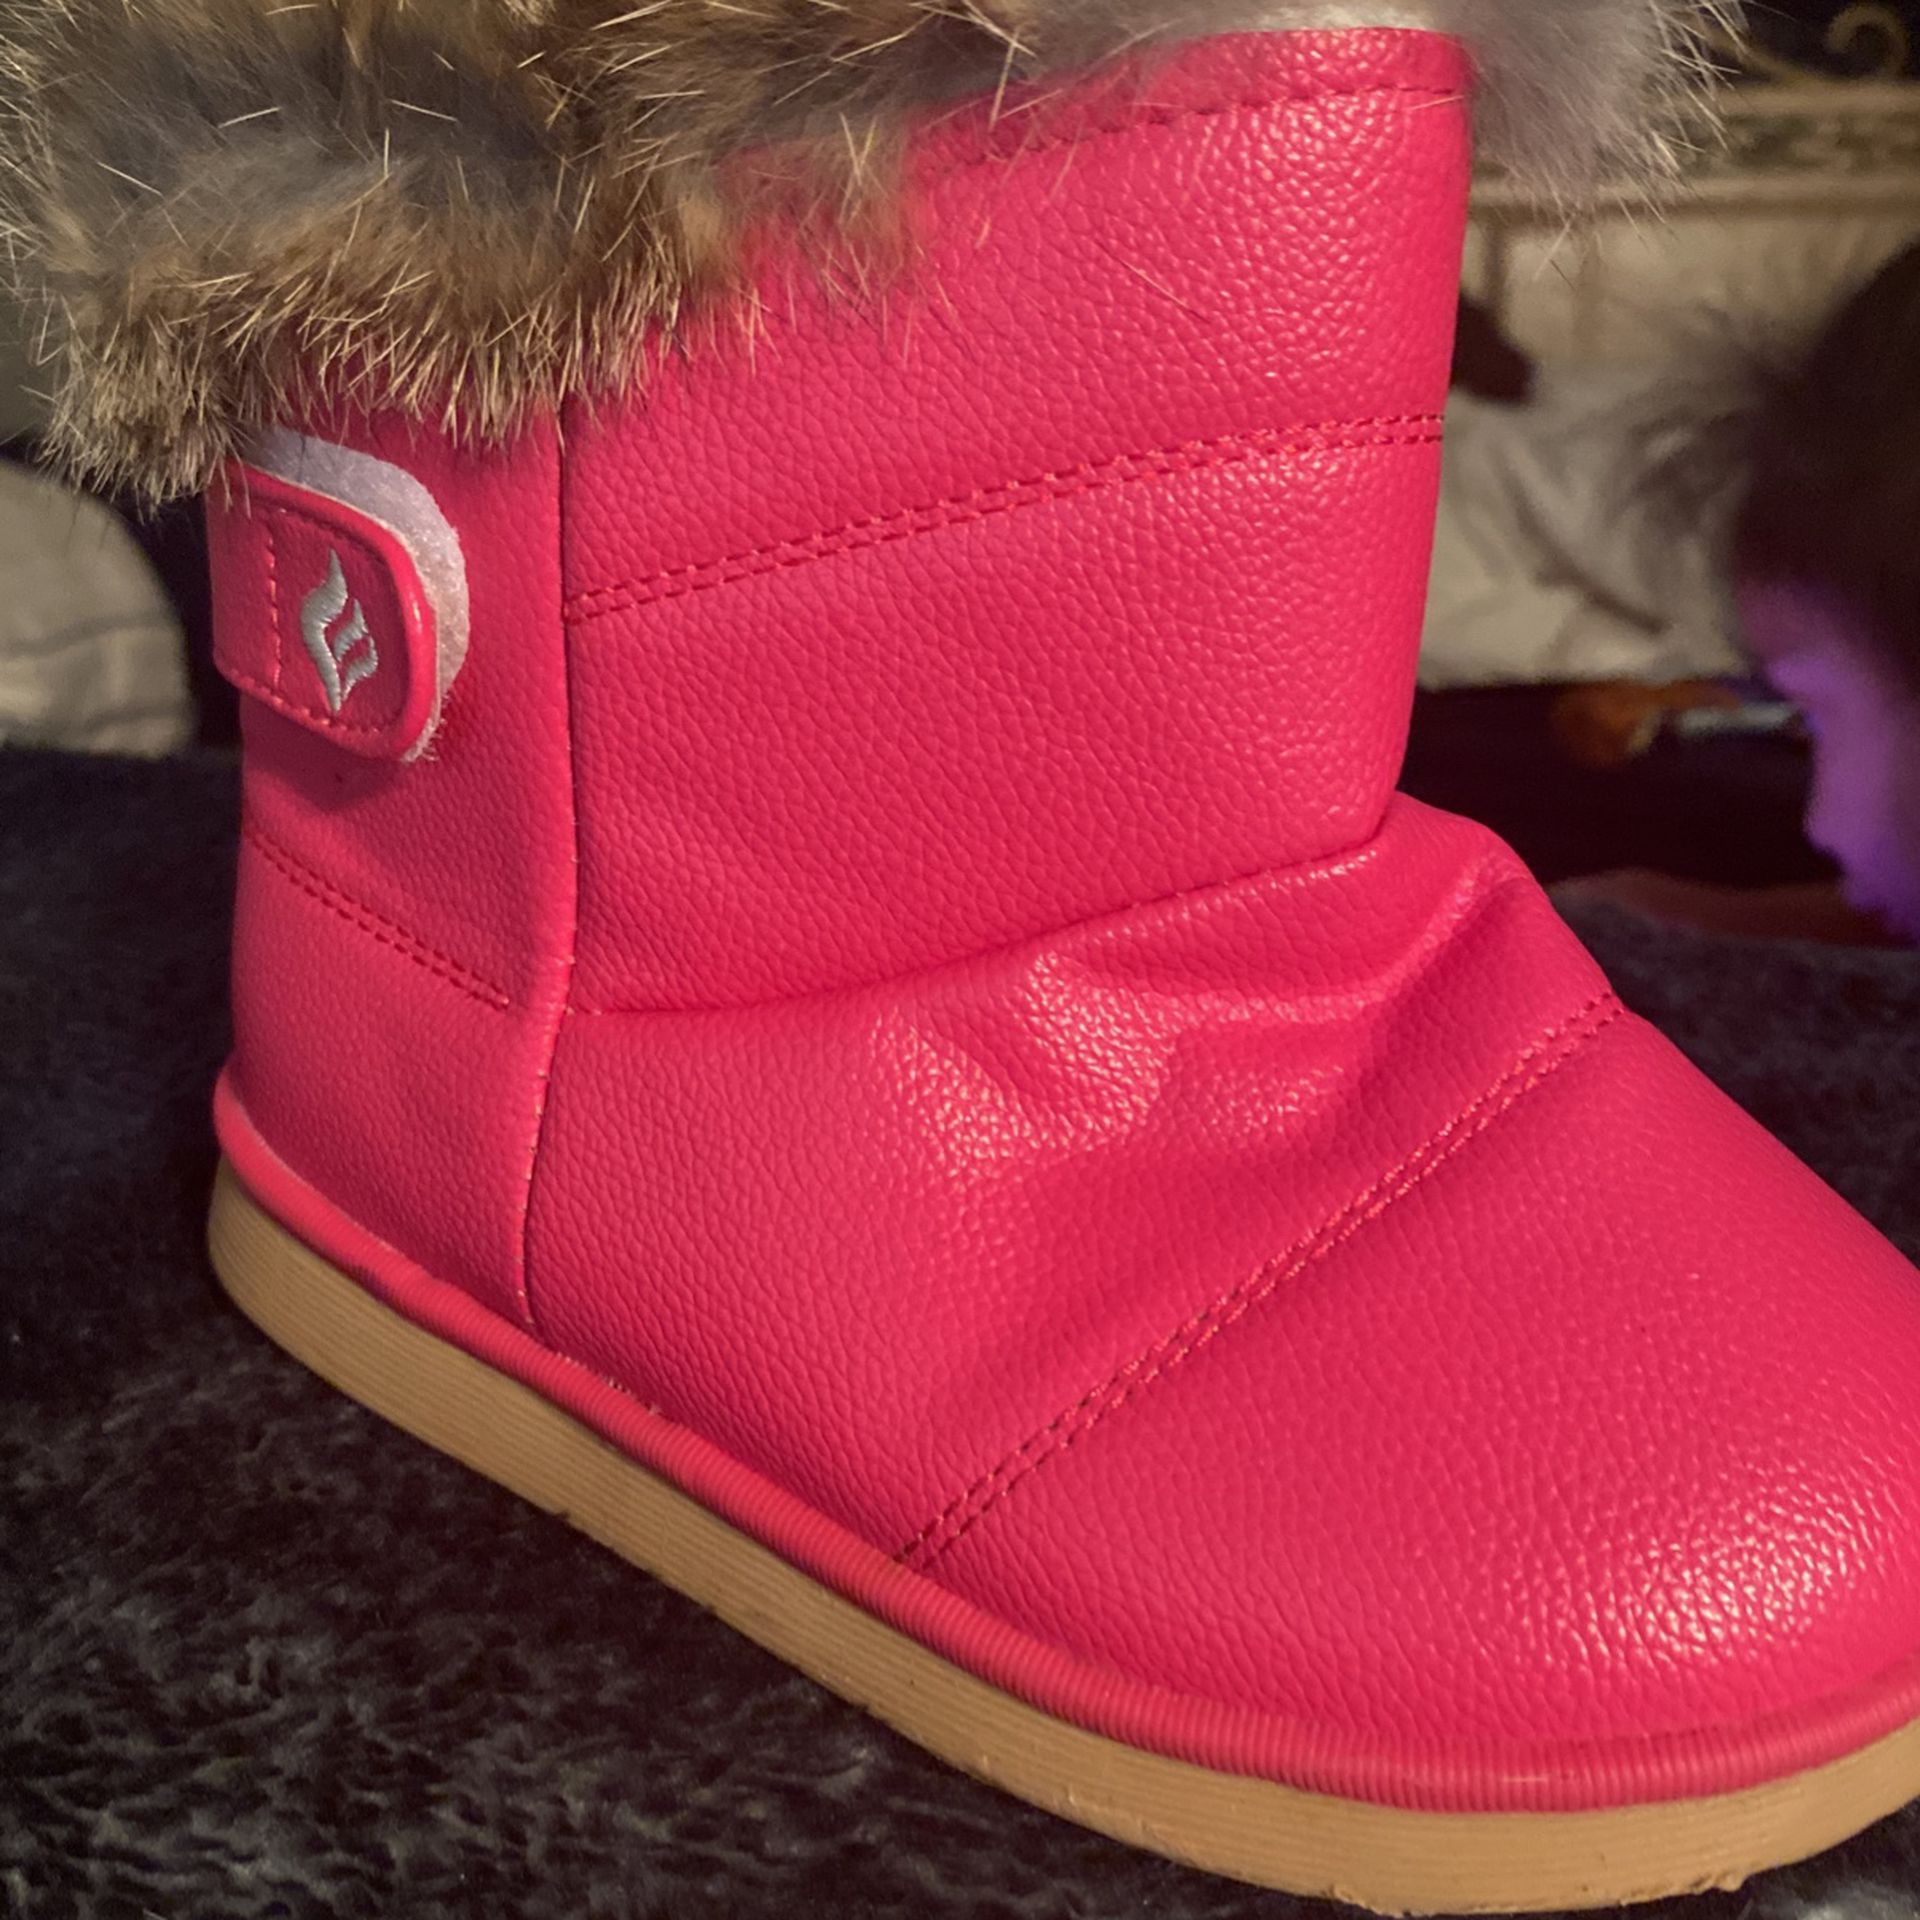 New  Toddler Snow Boot  Size  10 .